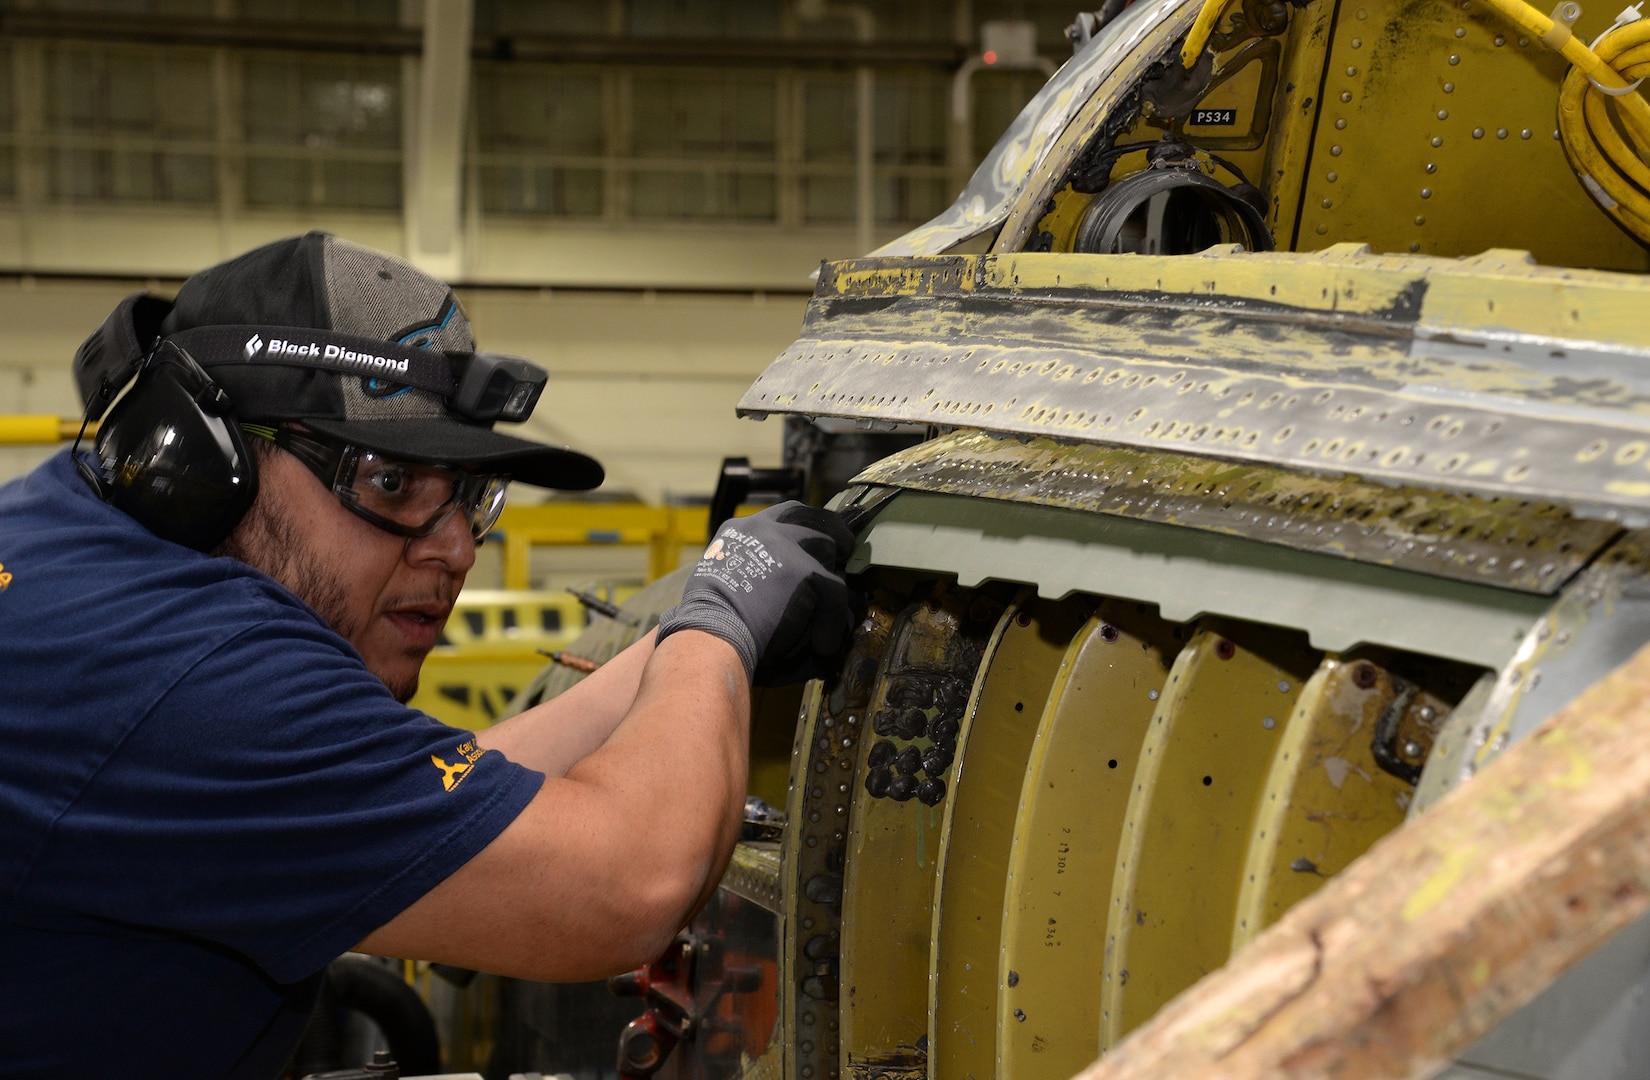 Michael Ramirez, 575th Aircraft Maintenance Squadron sheet metal technician, checks the alignment on a new left hand upper center longeron being installed on a T-38 Talon during the Pacer Classic III modification package April 17, 2018, at Joint Base San Antonio-Randolph, Texas. (U.S. Air Force photo by Alex R. Lloyd)